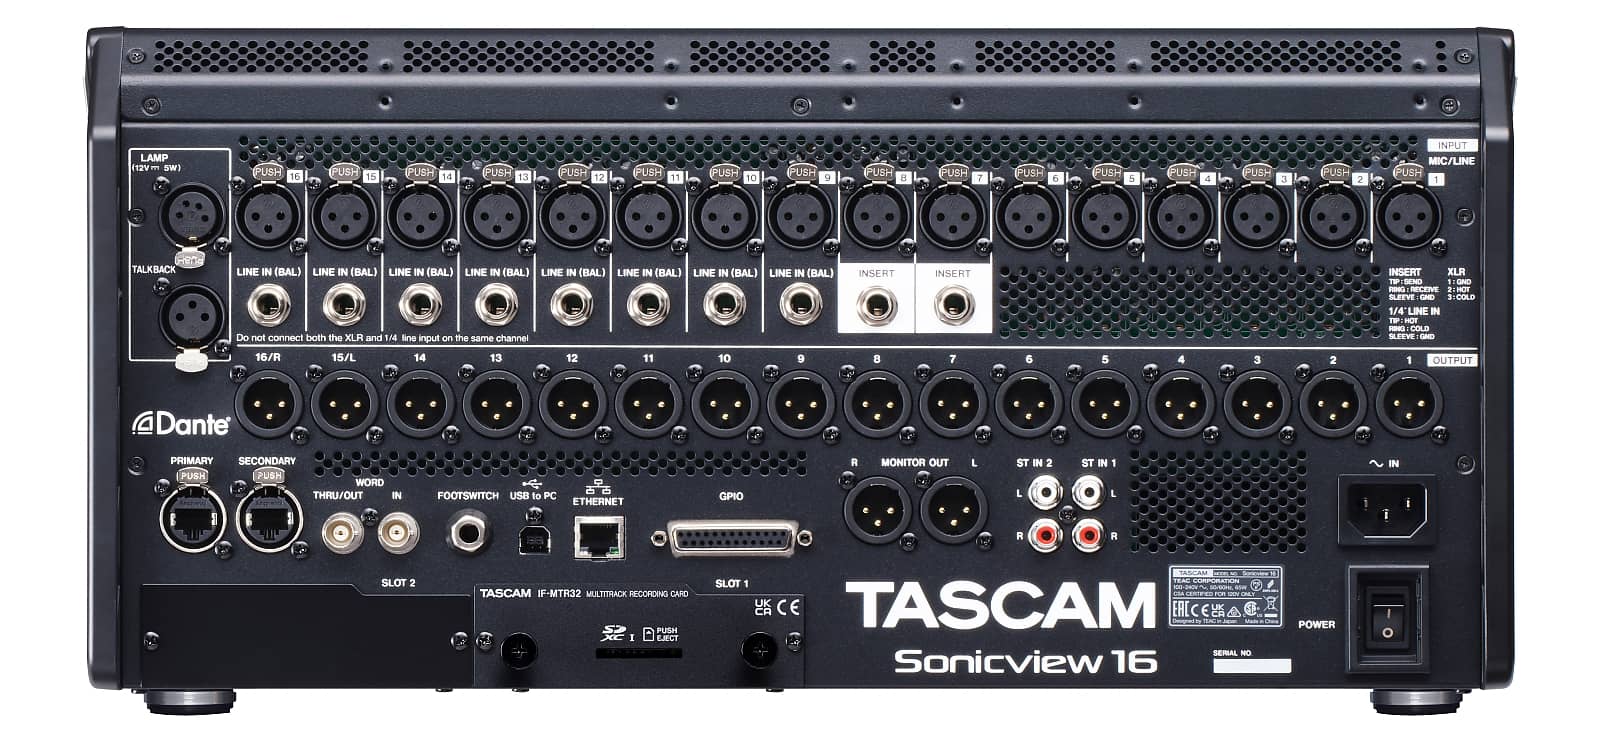 Rear view (with installed IF-MTR32) | Tascam Sonicview 16